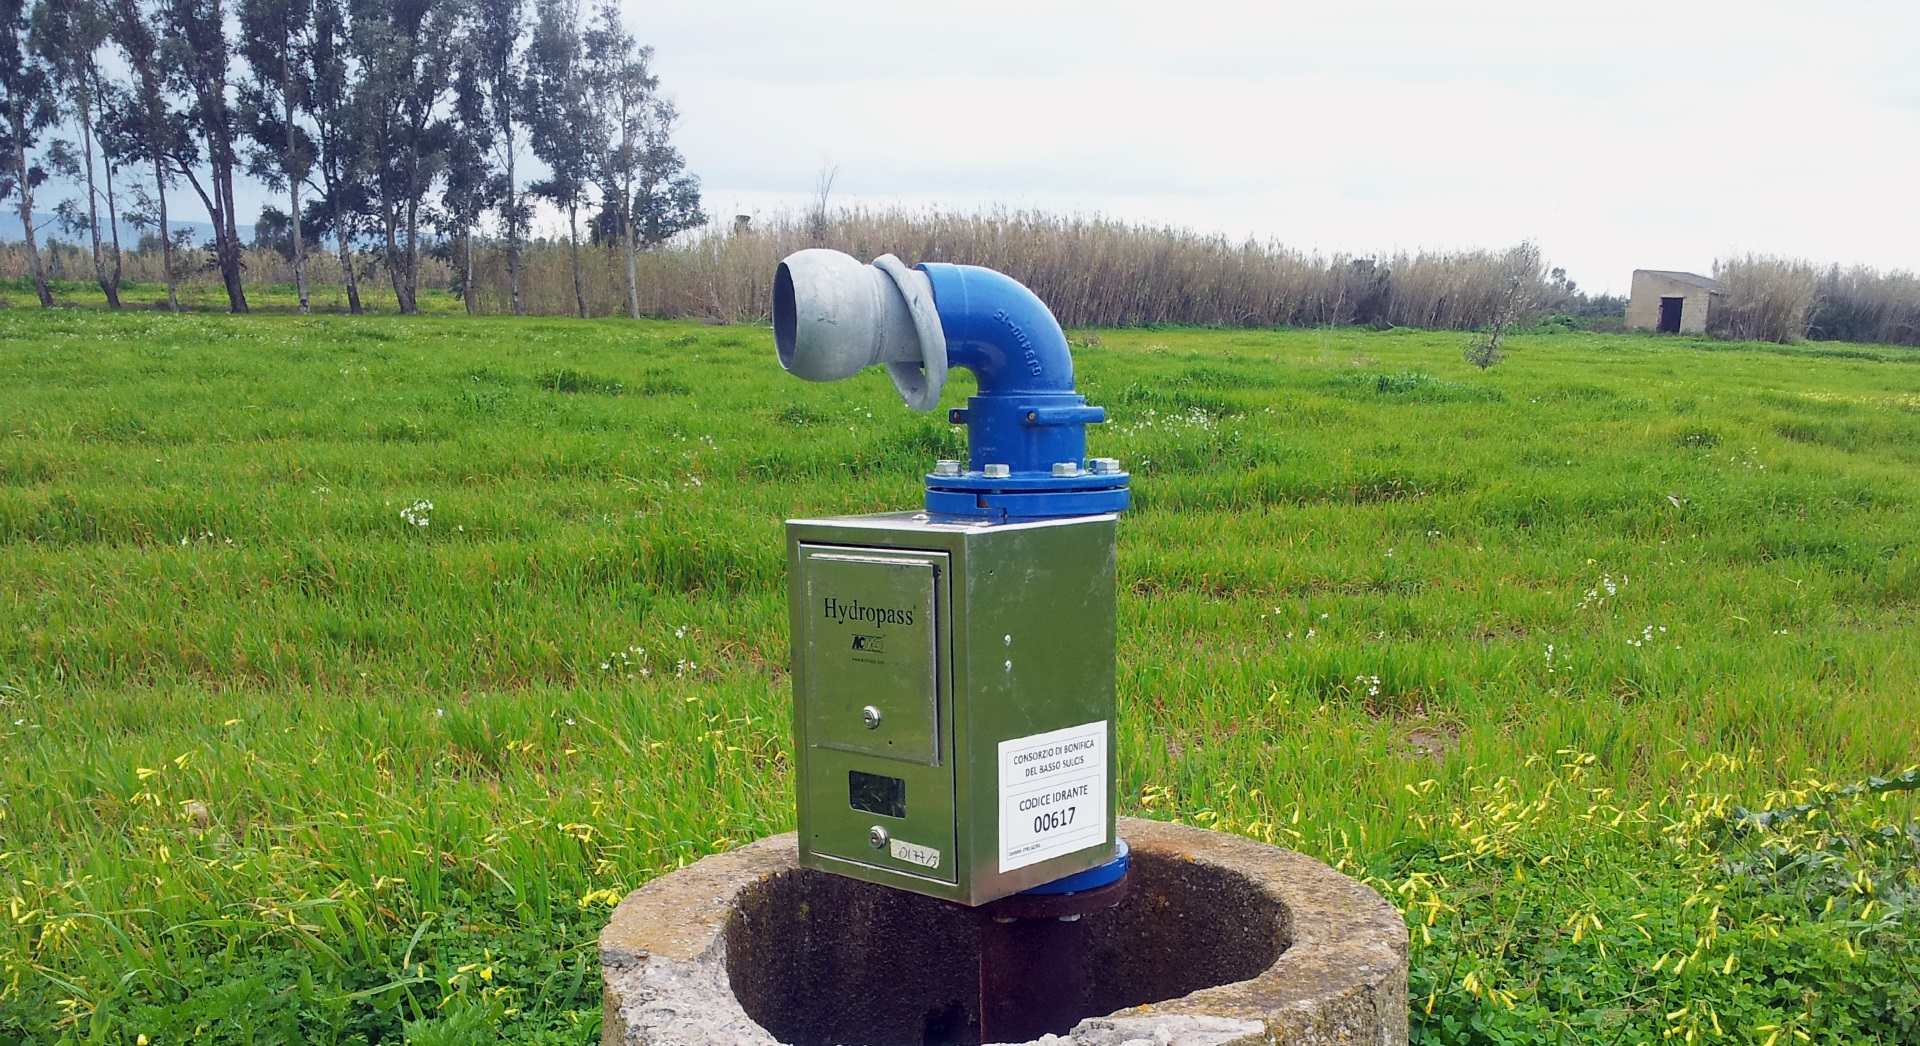 Irrigation hydrant with Hydropass installed in the field